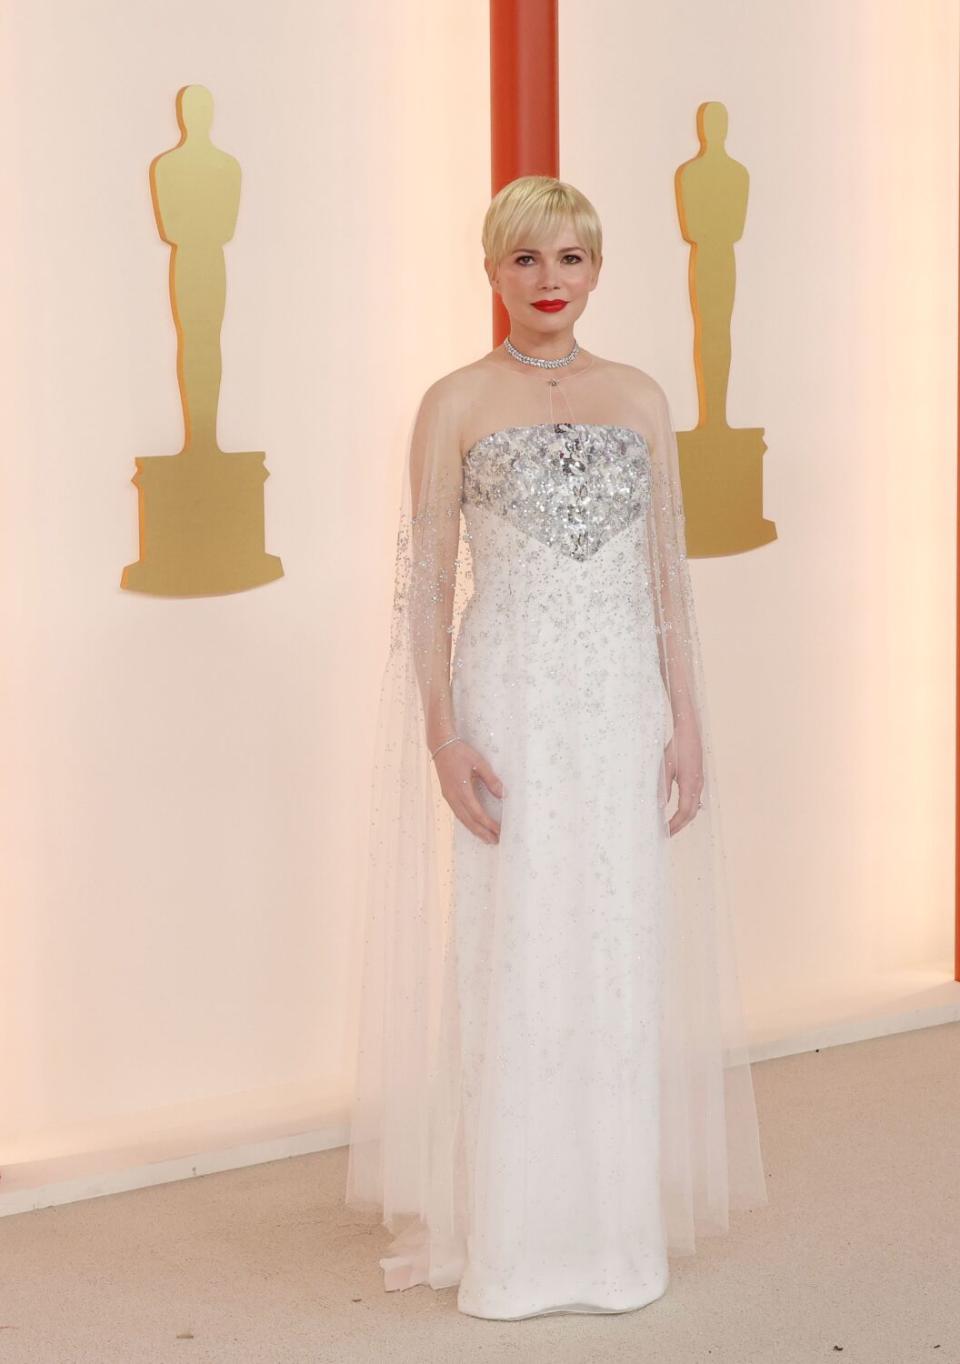 Michelle Williams in a gown with silvery, sparkling bustline and diaphanous white skirt.